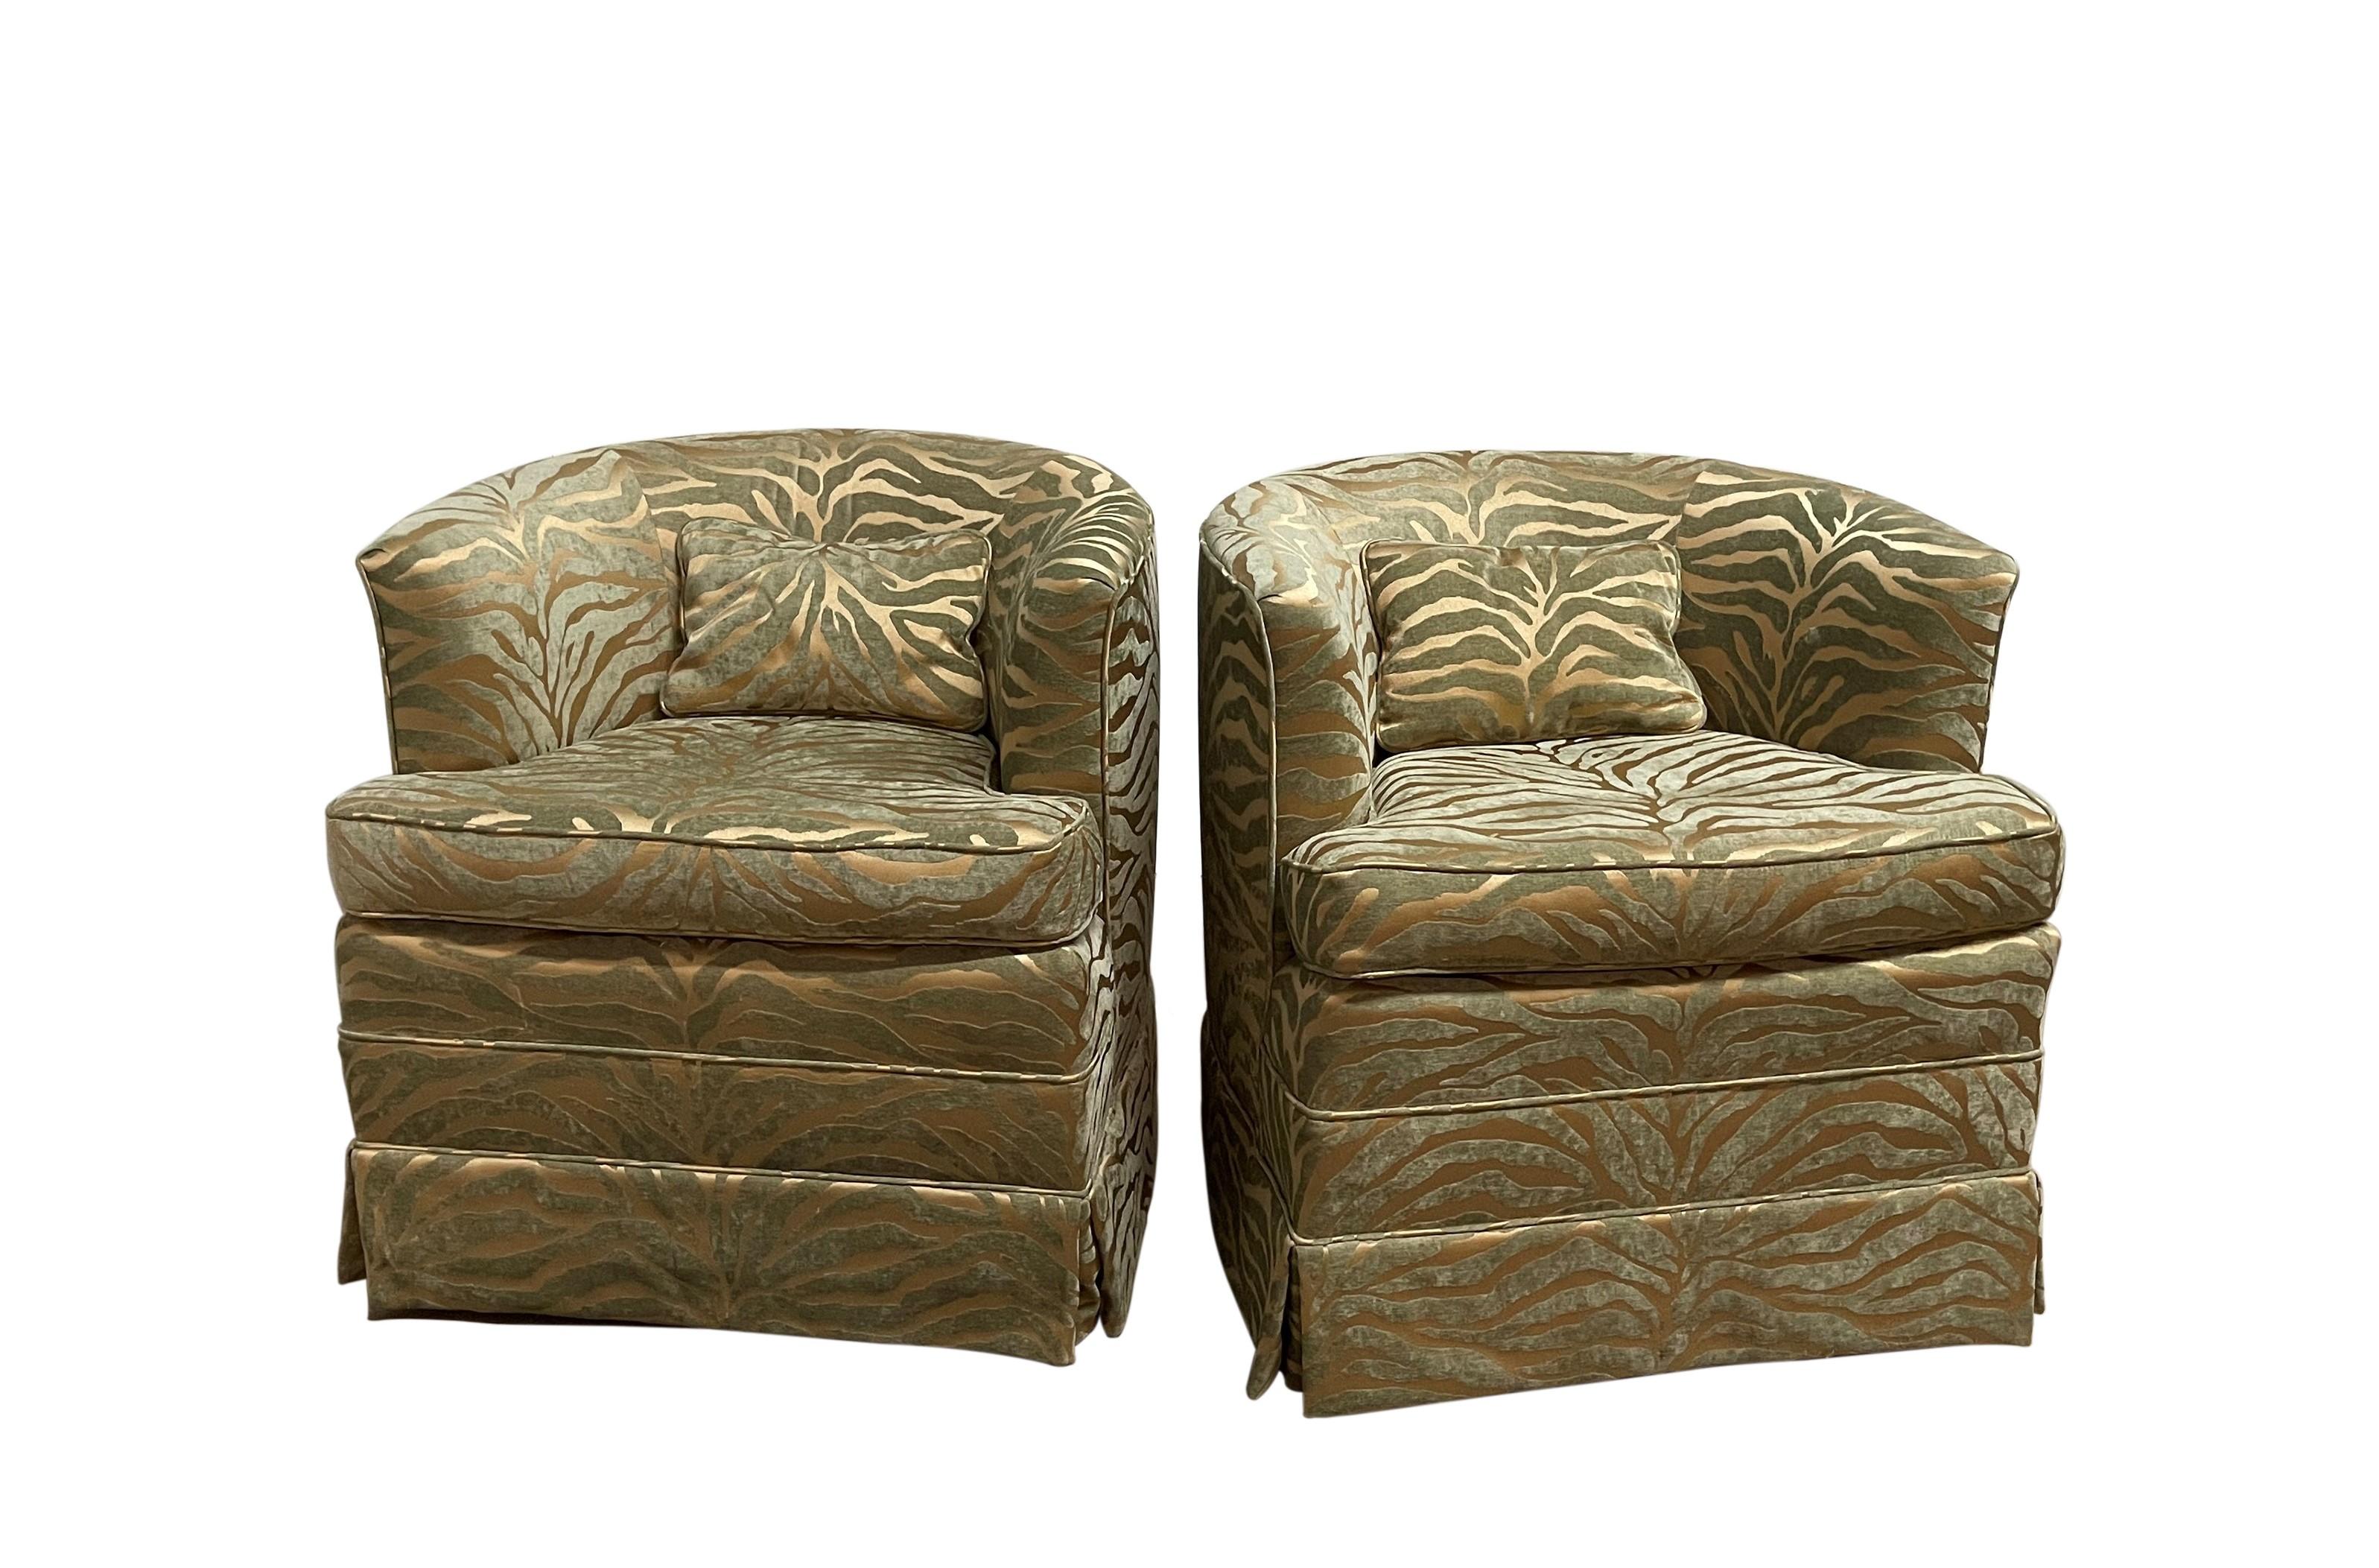 20th Century Pair of 1970's Swivel Barrel Back Chairs, Milo Baughman Style For Sale